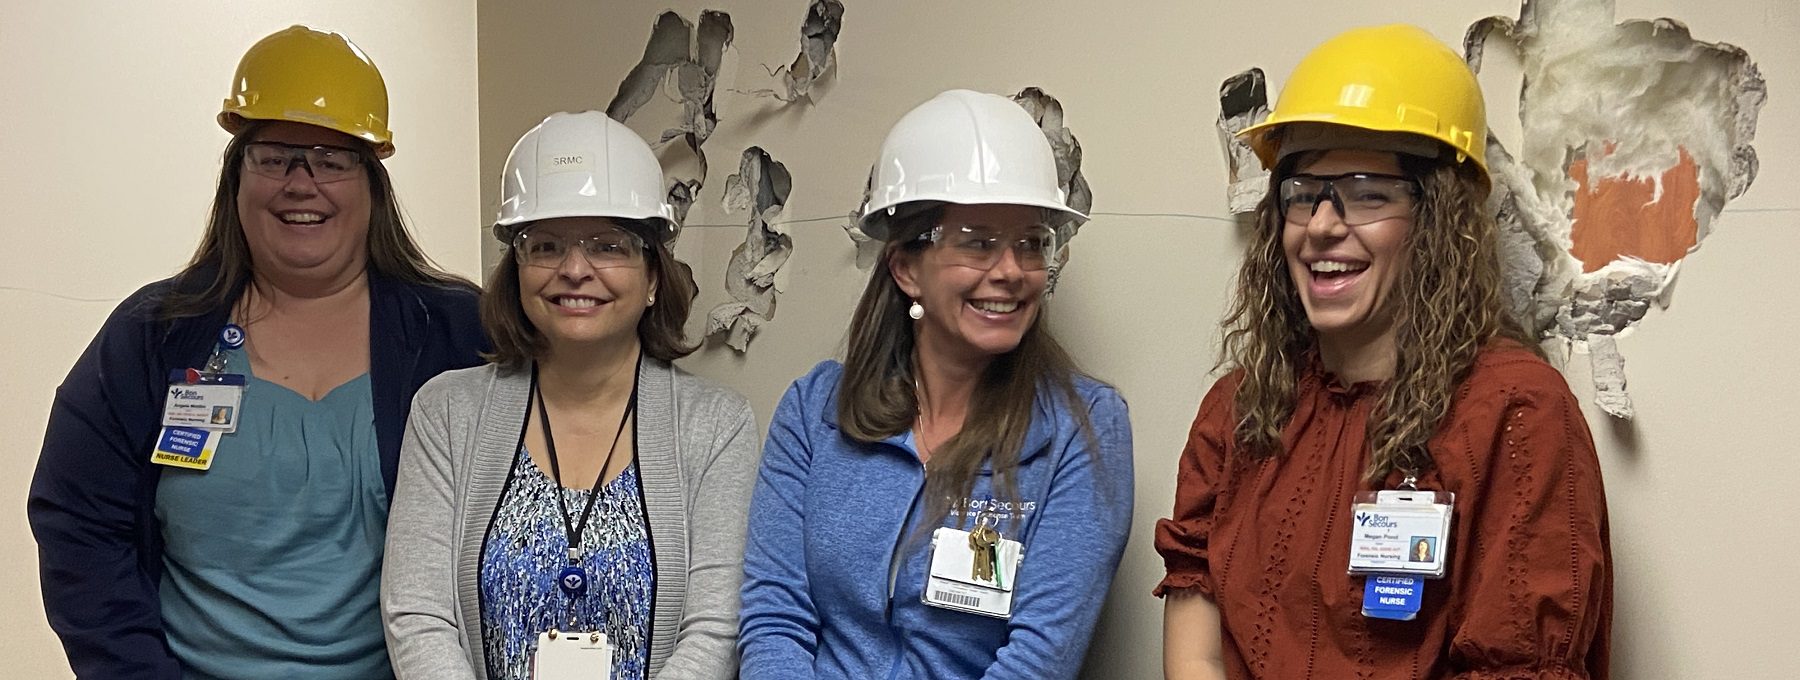 A group of professional women wearing hard hats pose and smile underneath a row of holes in drywall.